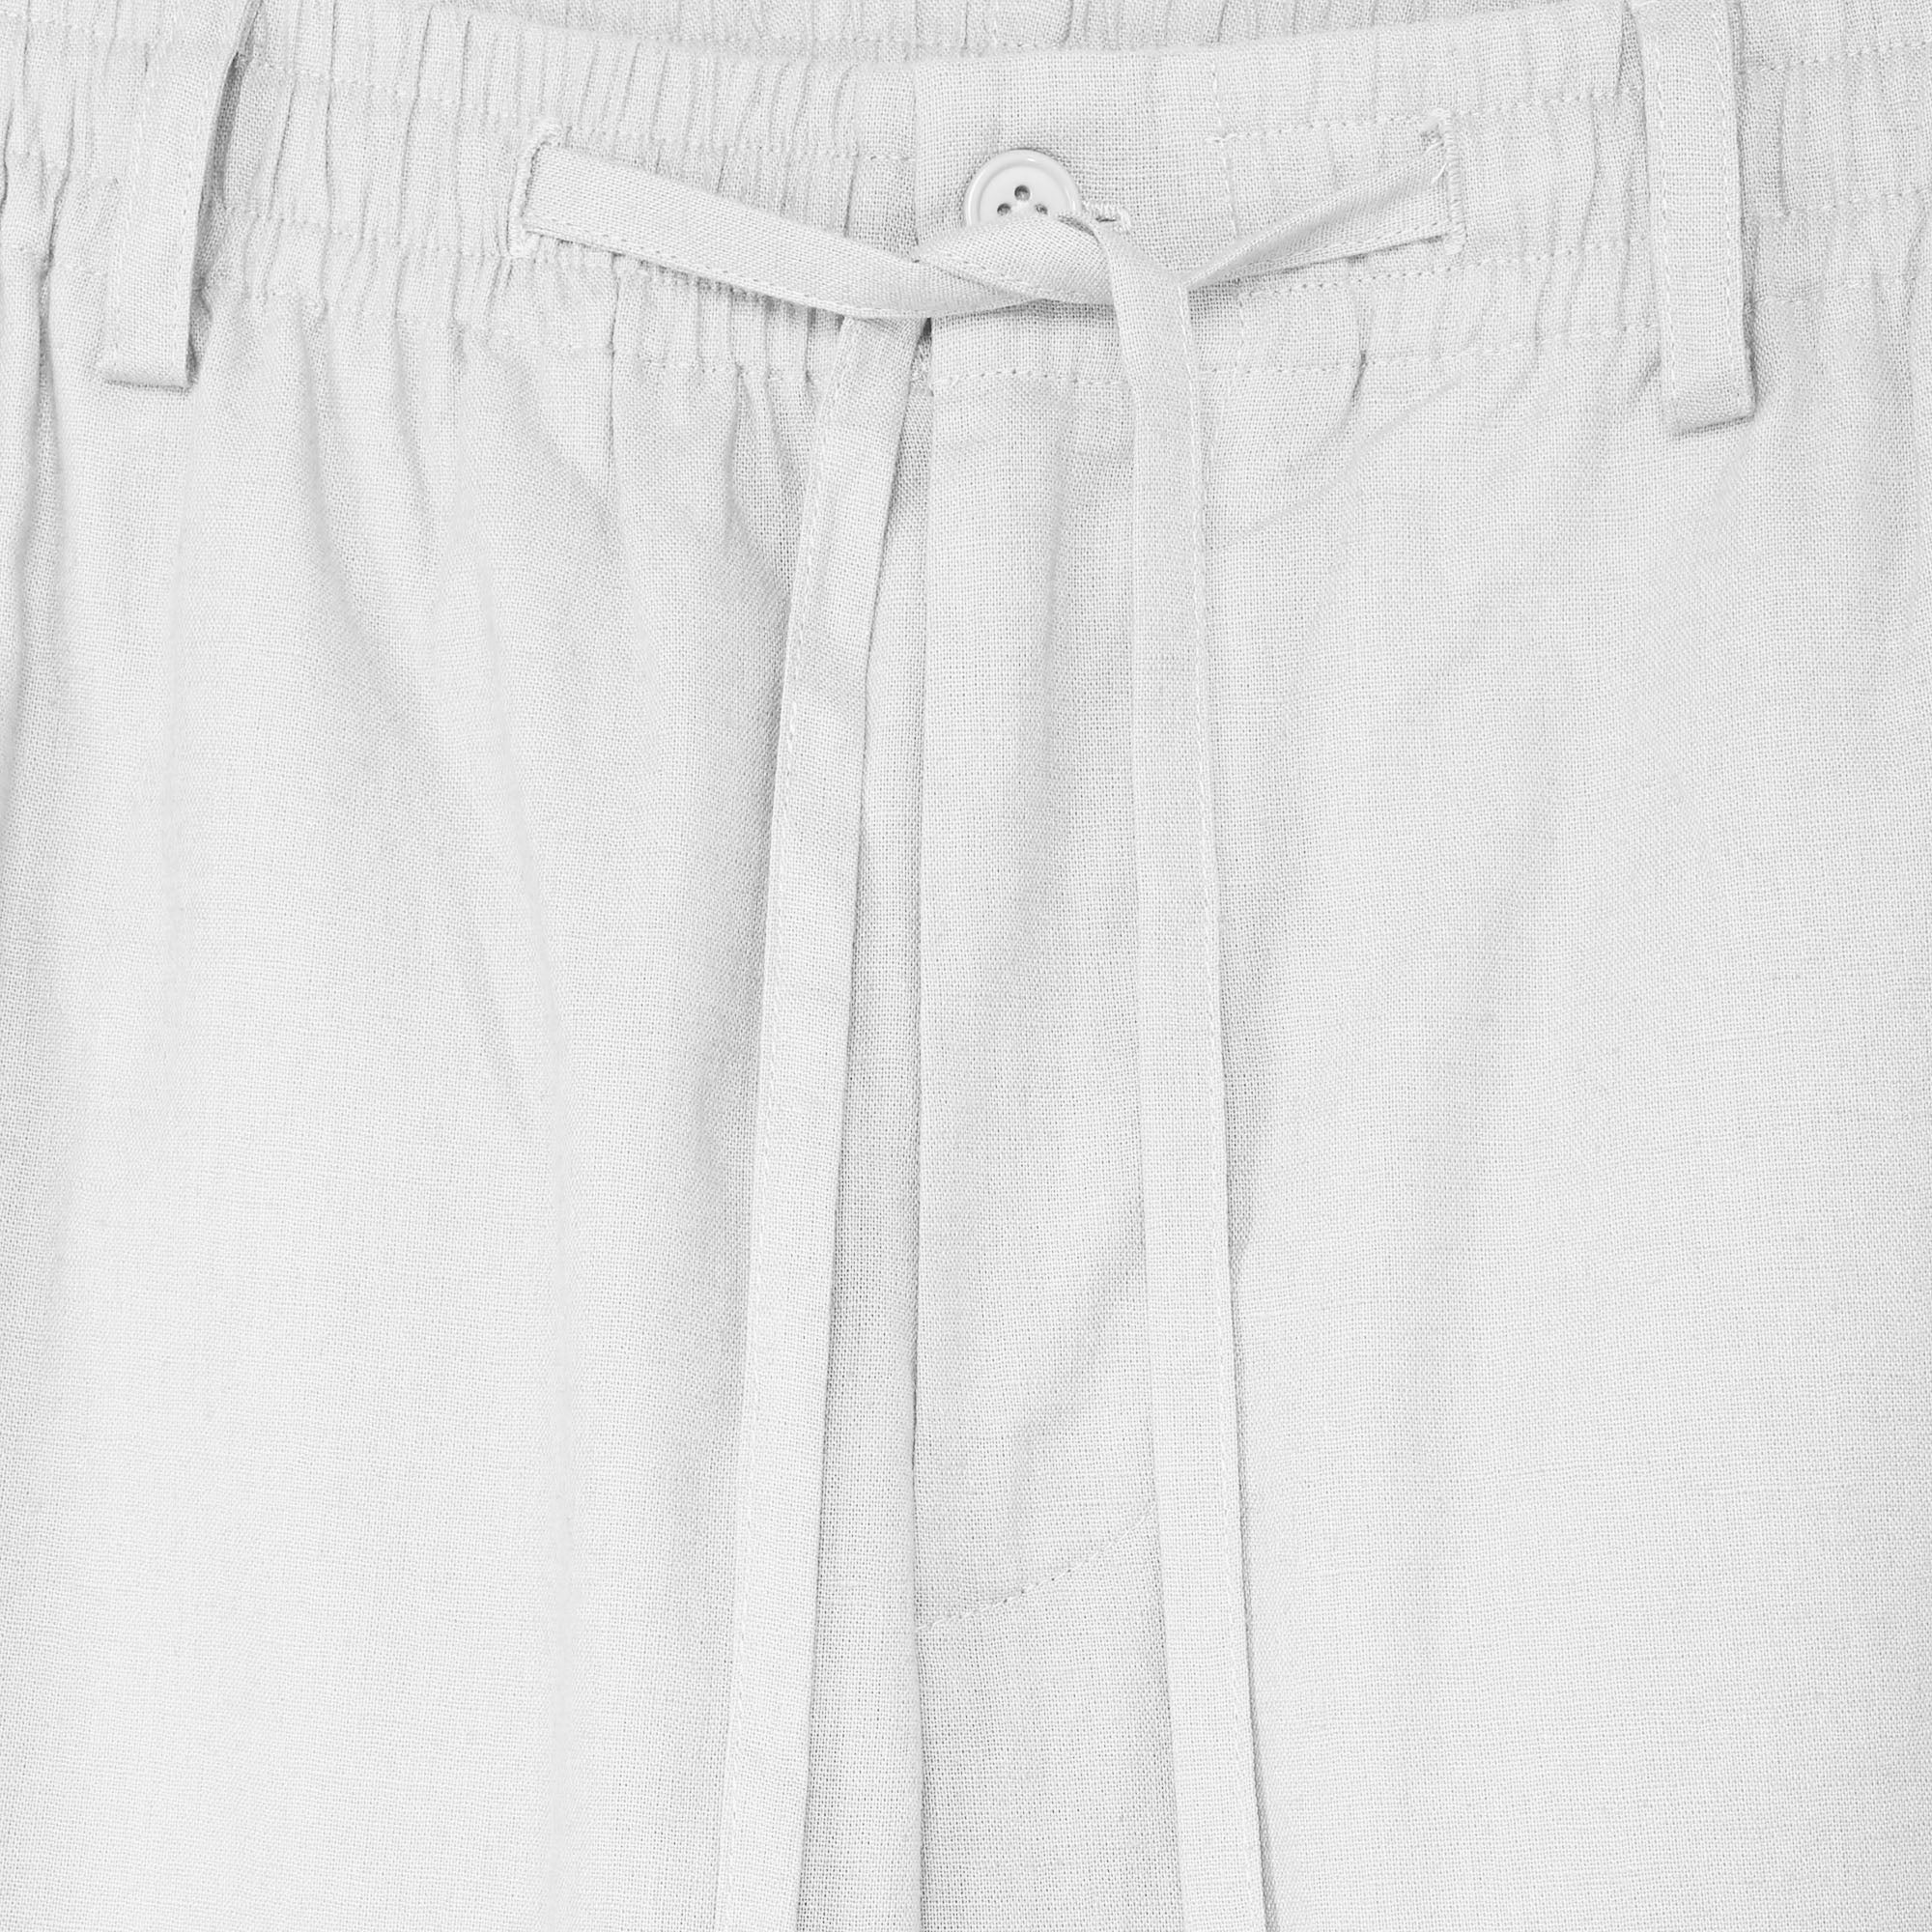 mens linen pants_linen_trousers_work at home_remote_formal business_casual_missy_old navy_wide leg_plus size_petite_linen_blend pants_cotton_macys_zara_oceanside_beach_pants_roxy_romper_drawstring_summer_coverup_tote_resort pants_relax_organic_cotton_hawaii_clearance_White